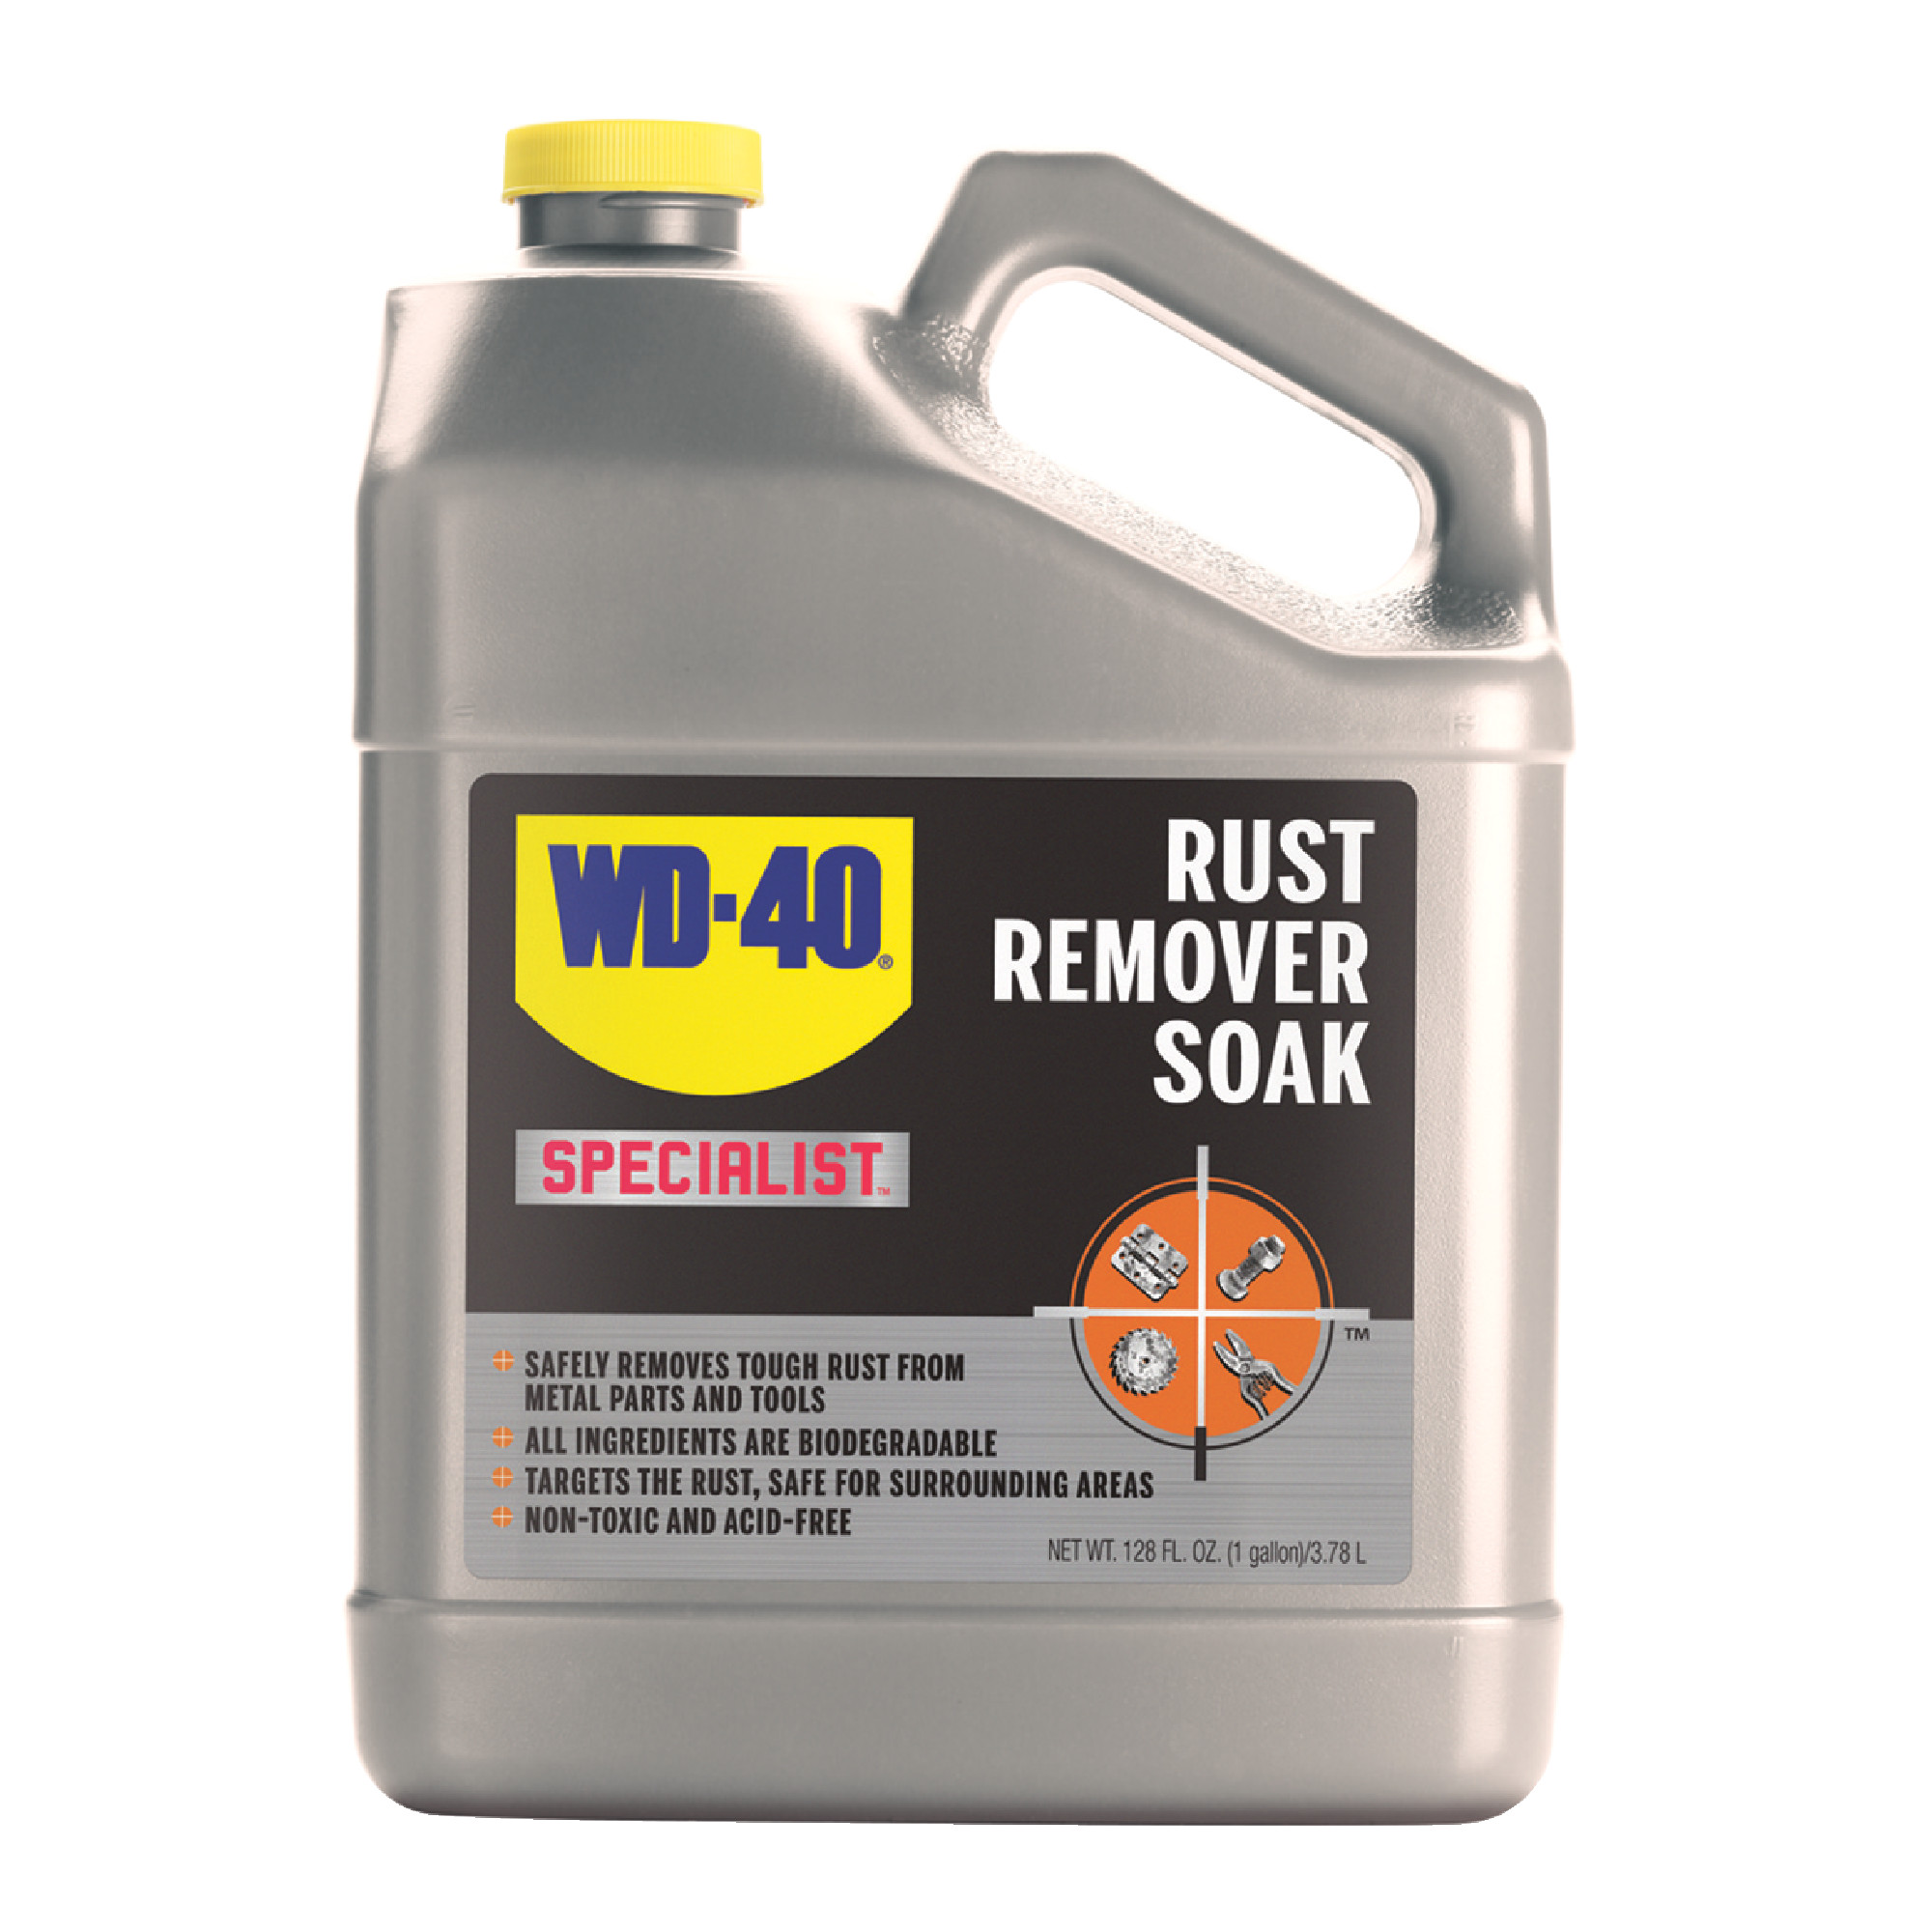 WD-40 Rust Remover - MFR : 300042   Container Size: 1 Gallon